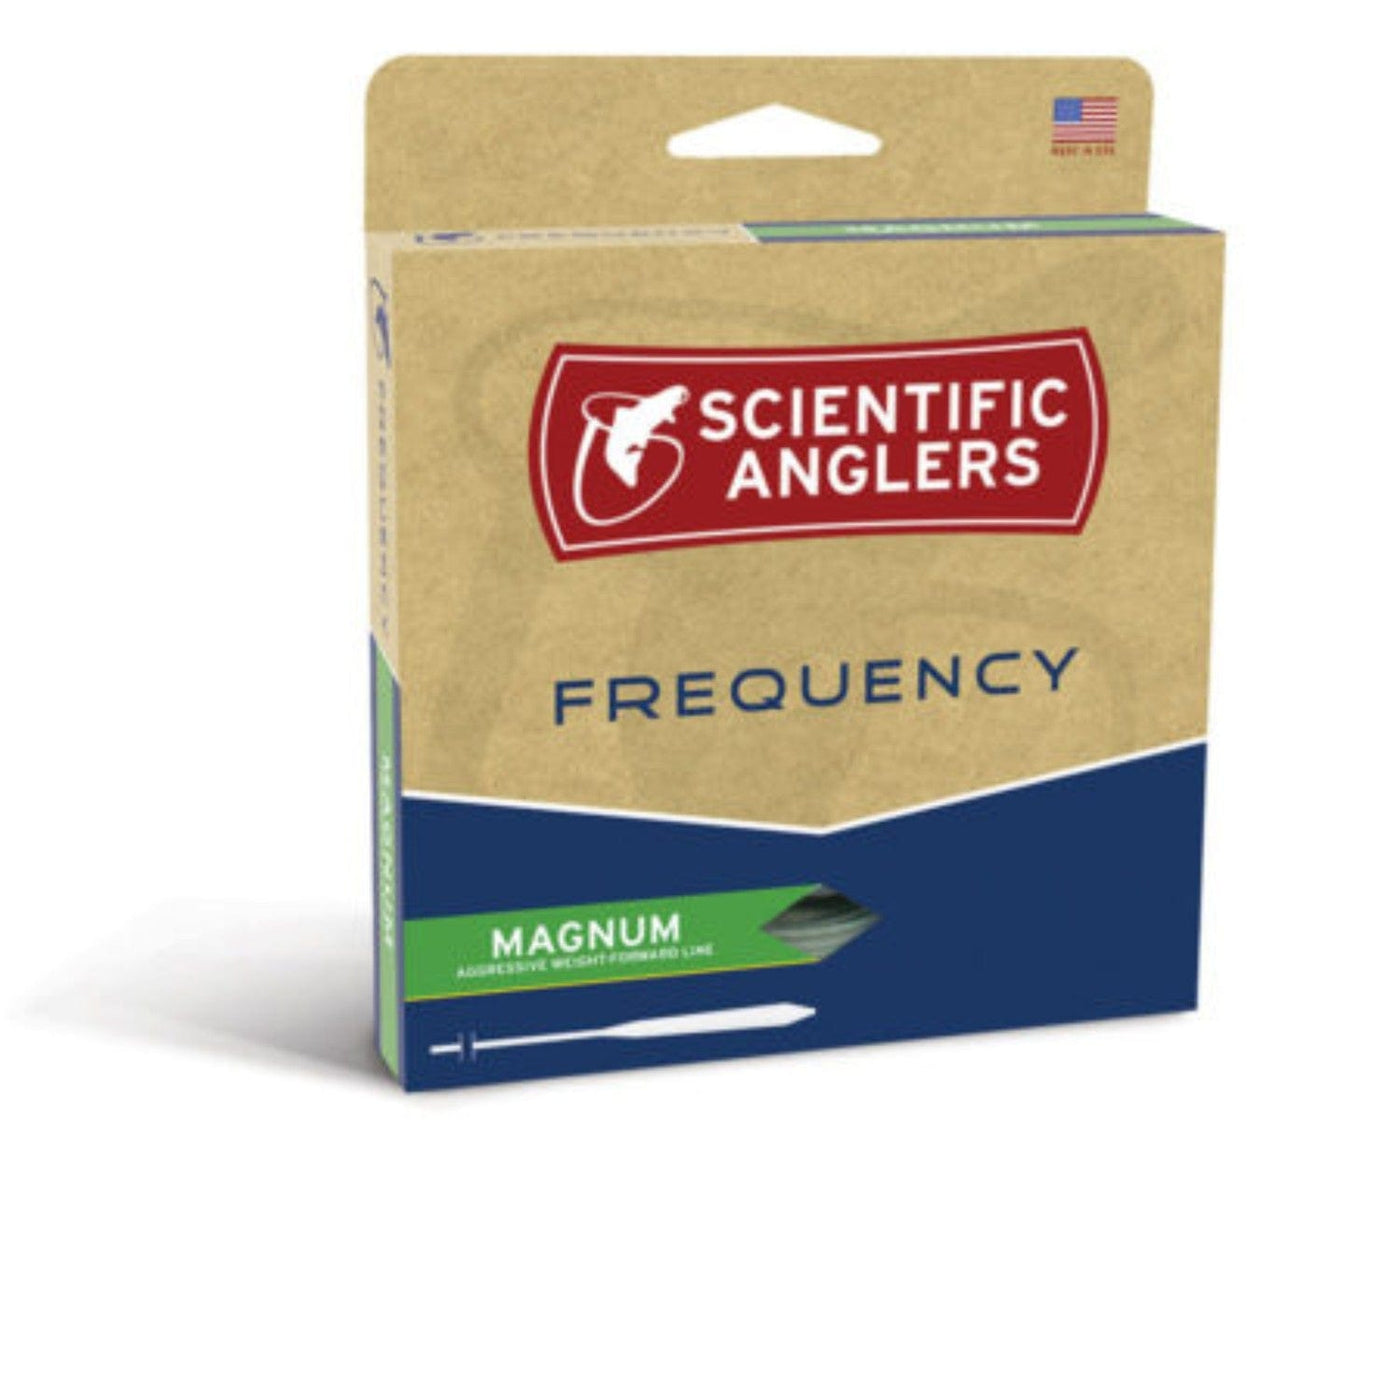 Scientific Anglers Scientific Anglers Frequency - Magnum - Ivory Glow WF-8-F Fishing